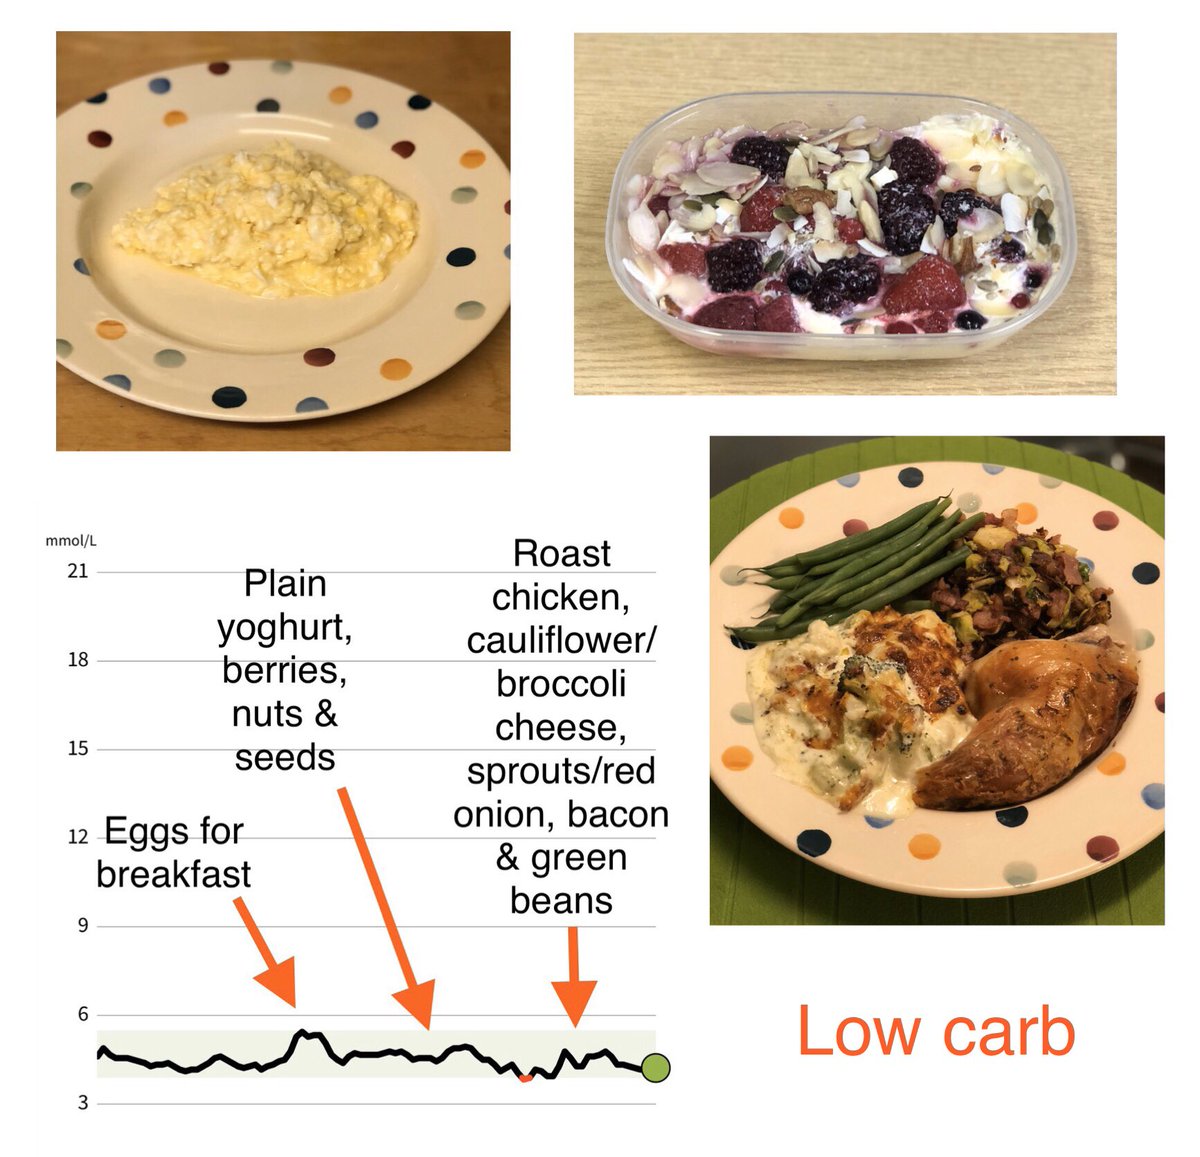 I enjoy eating low carb food & I feel much healthier both physically and mentally. This was yesterday’s stable blood glucose levels with low carb food. I had eaten high carb the day before so I woke hungry but only had time for eggs but they kept me going all morning.  #lchf